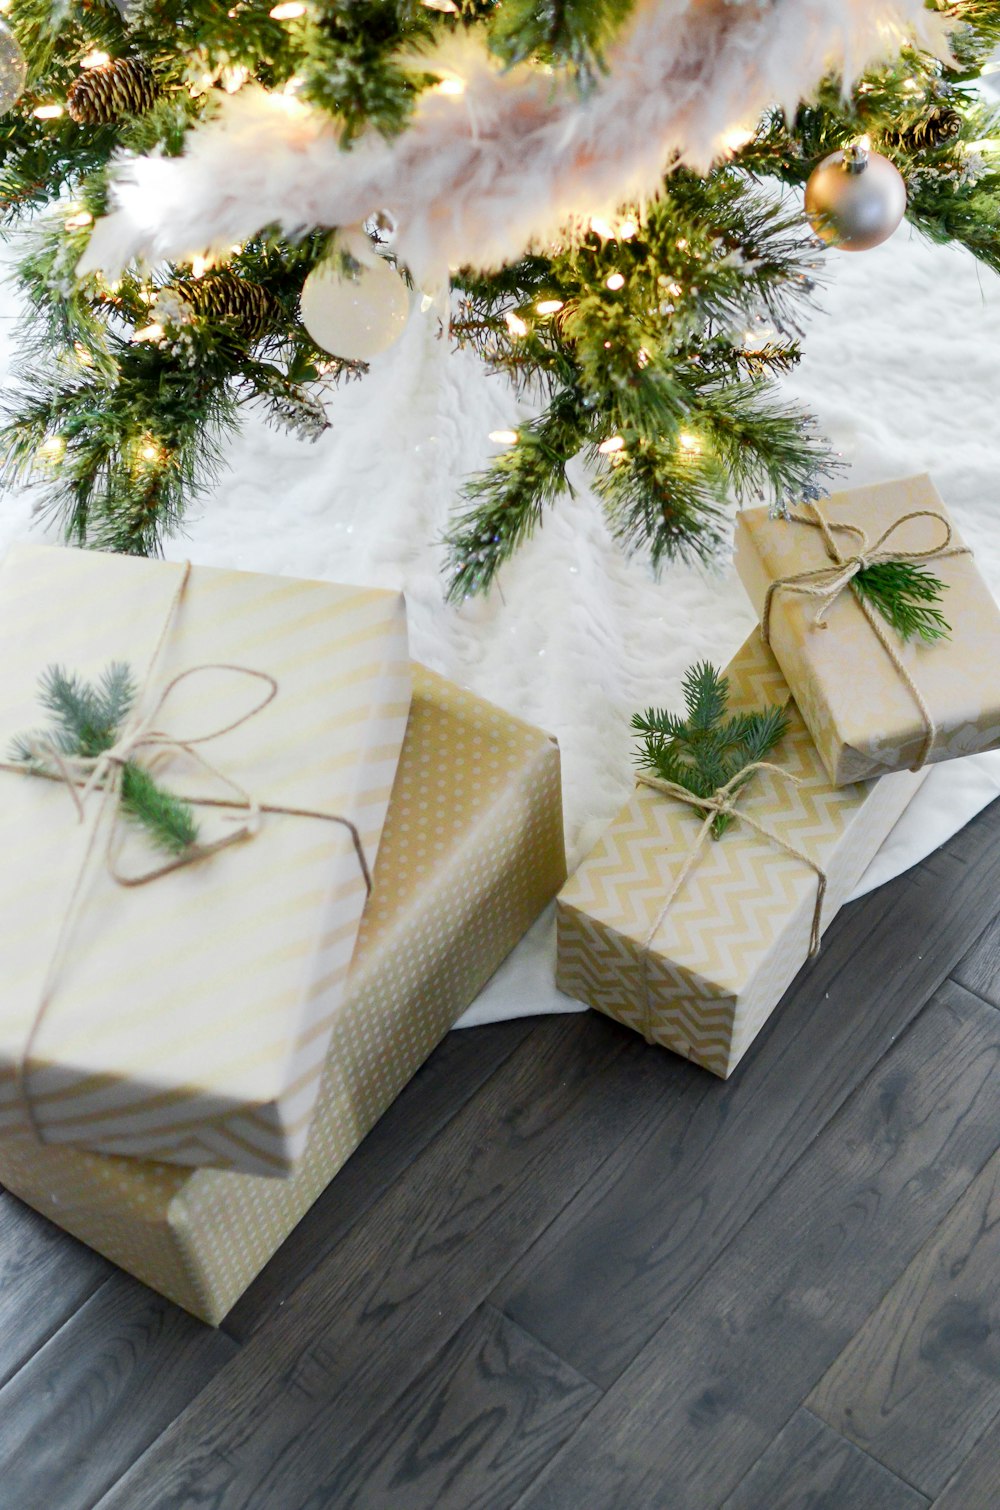 four gift boxes under Christmas tree